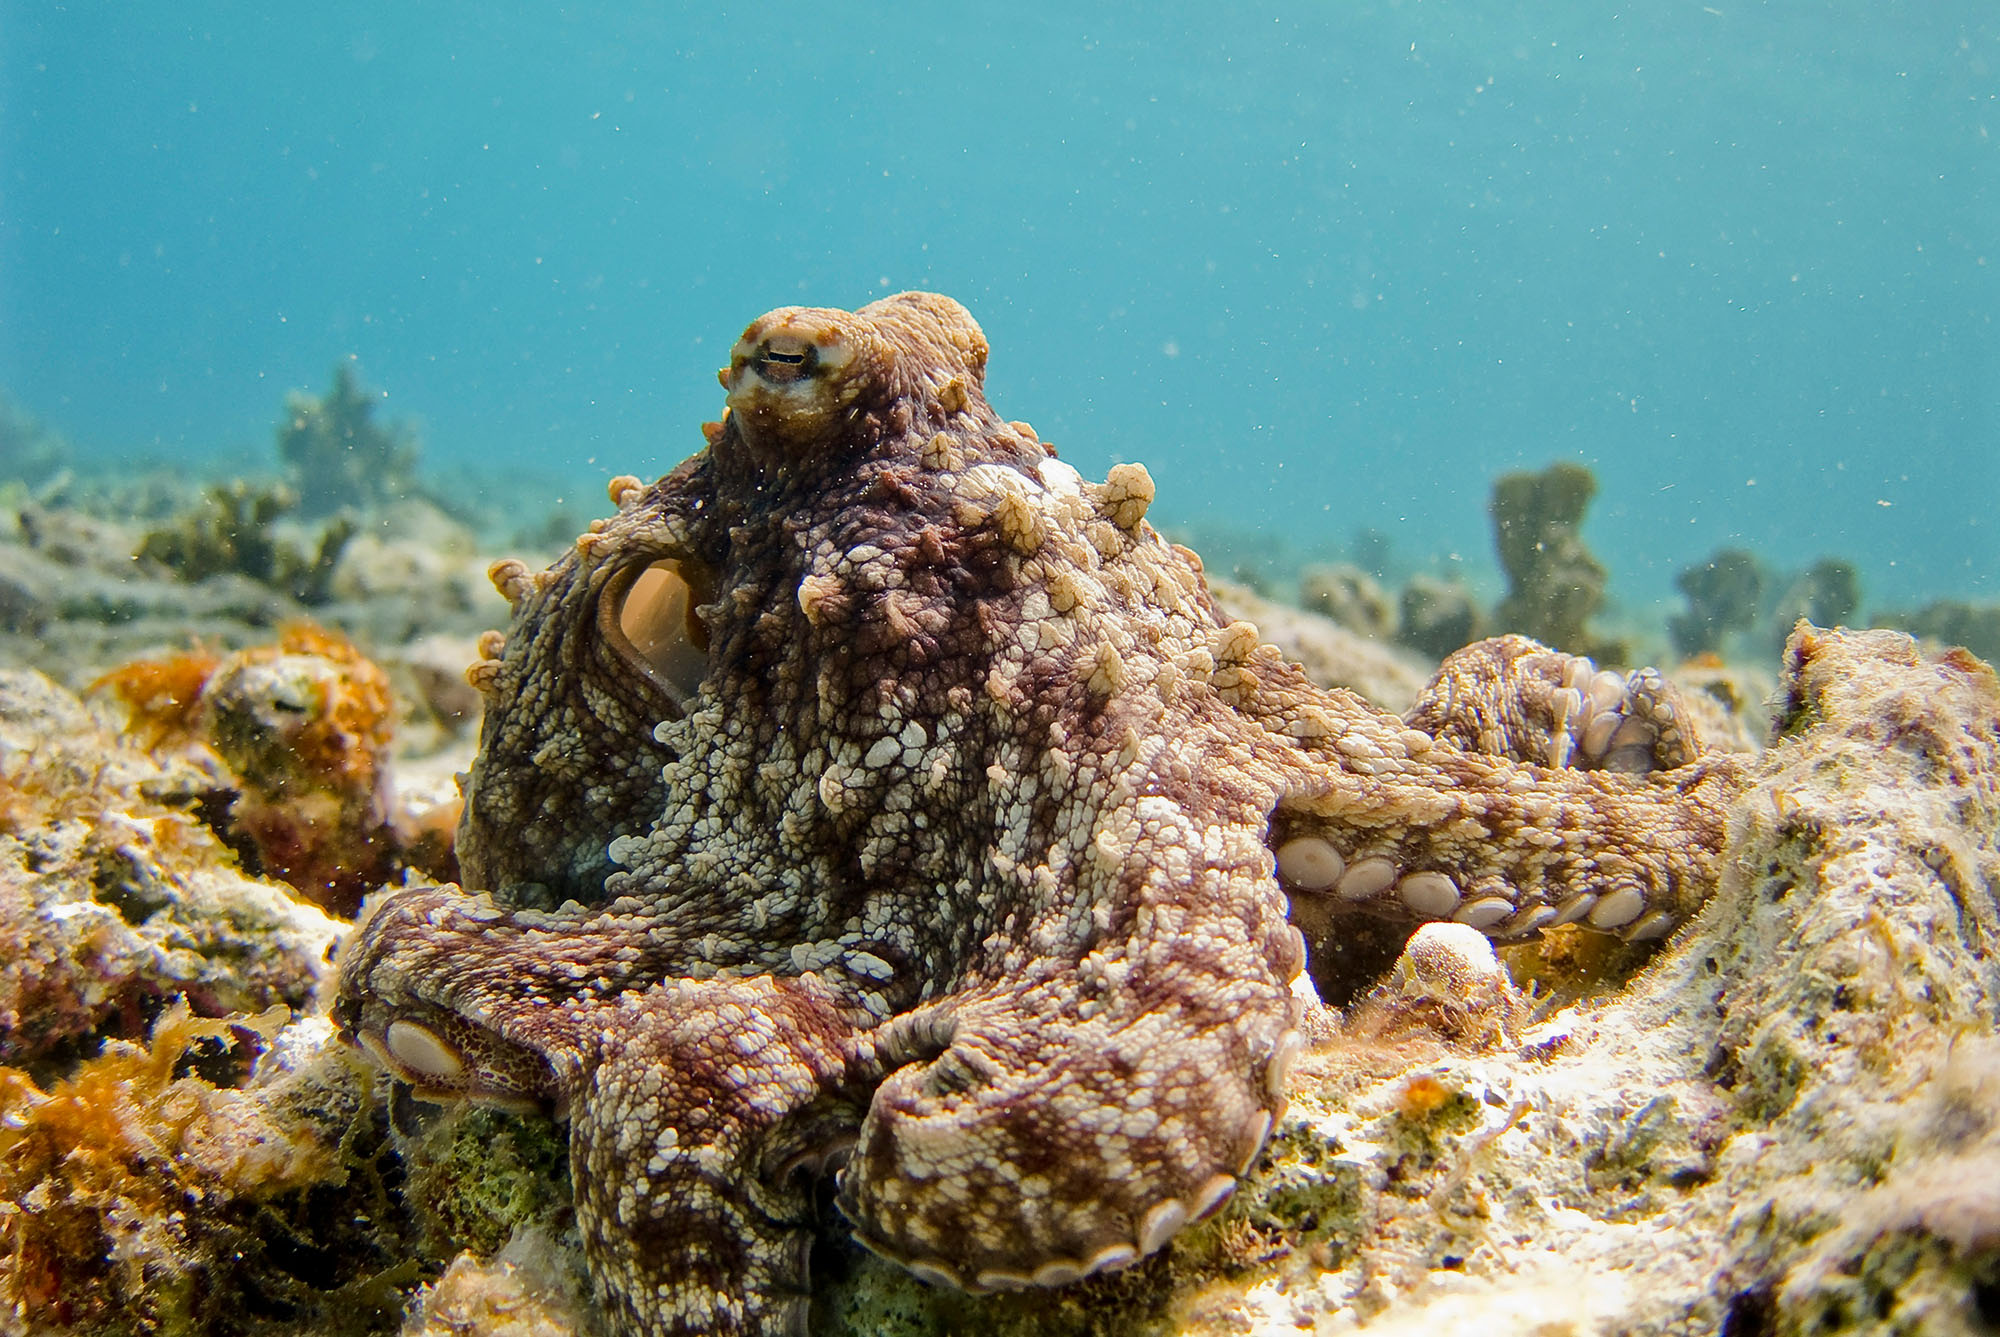 Brown Octopus with full active camoflauge